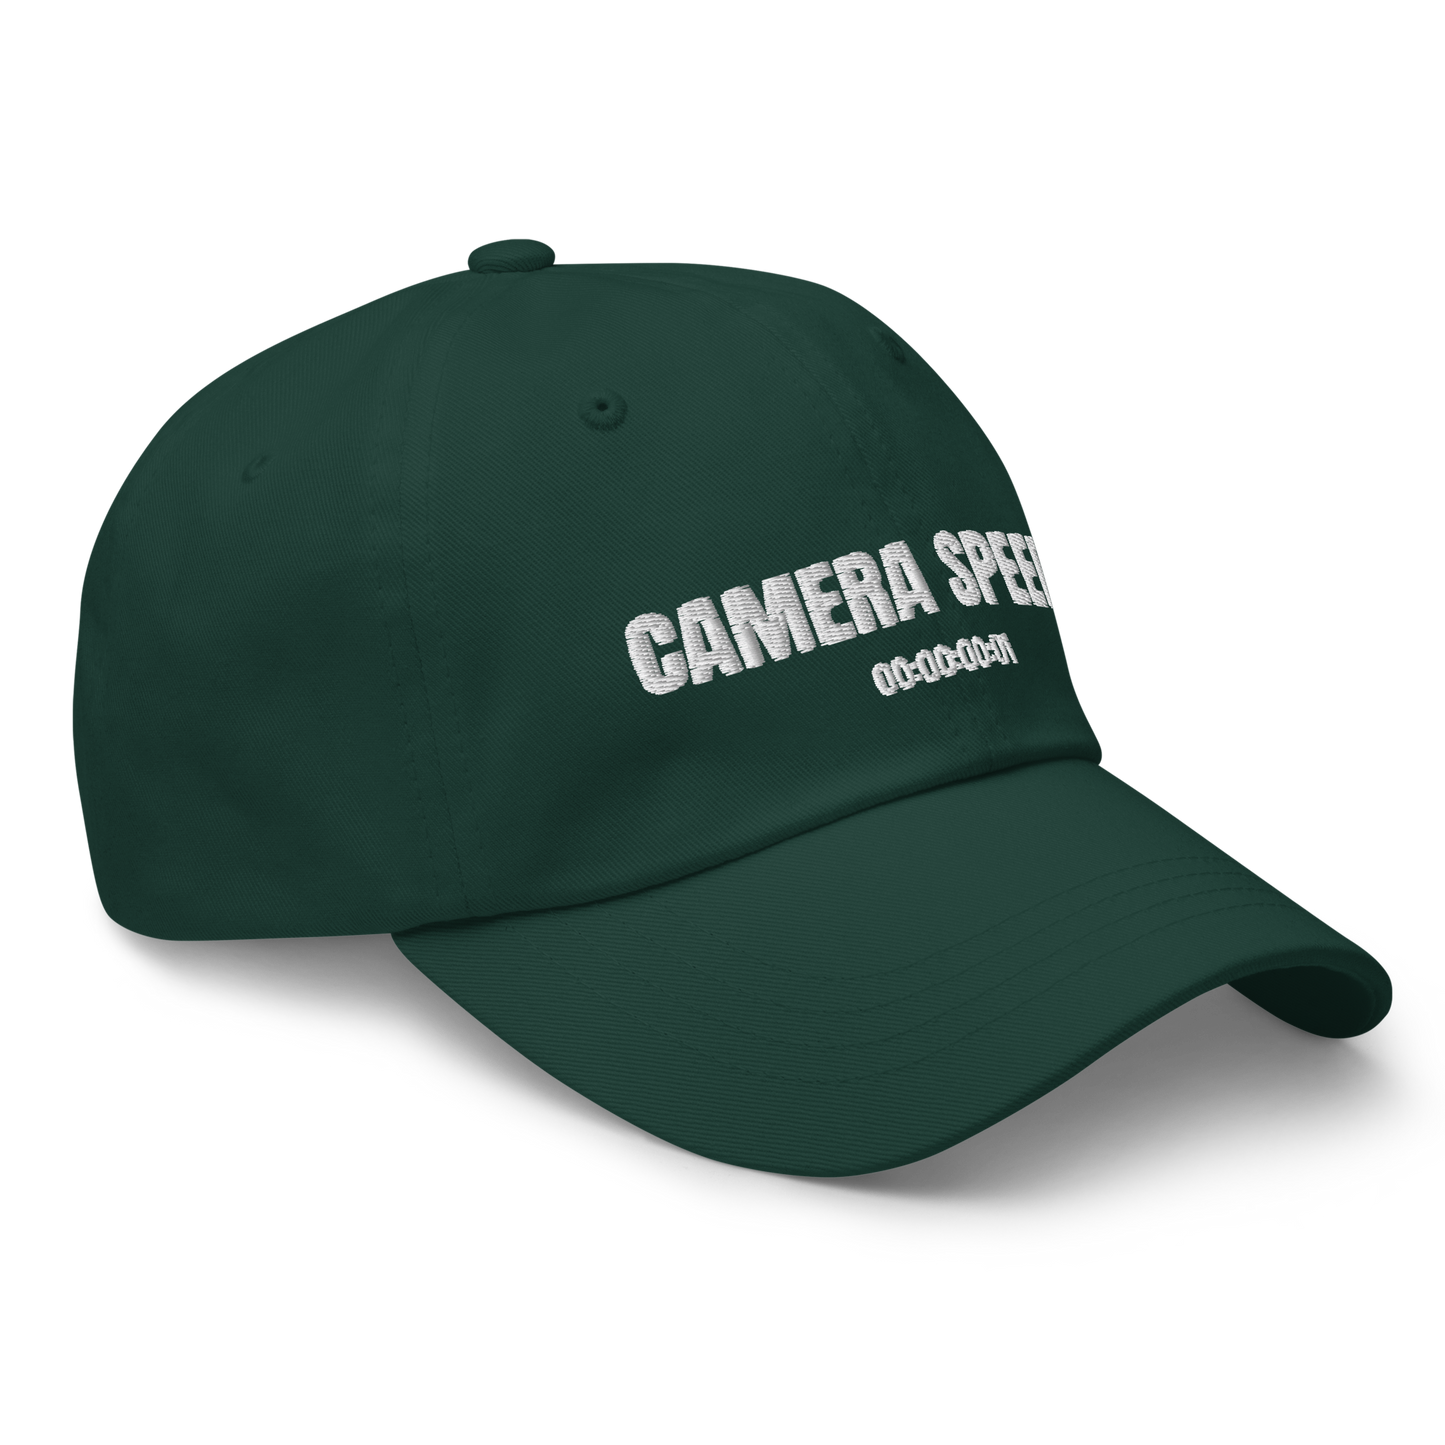 Camera Speeds Classic Dad Hat (Variant A)